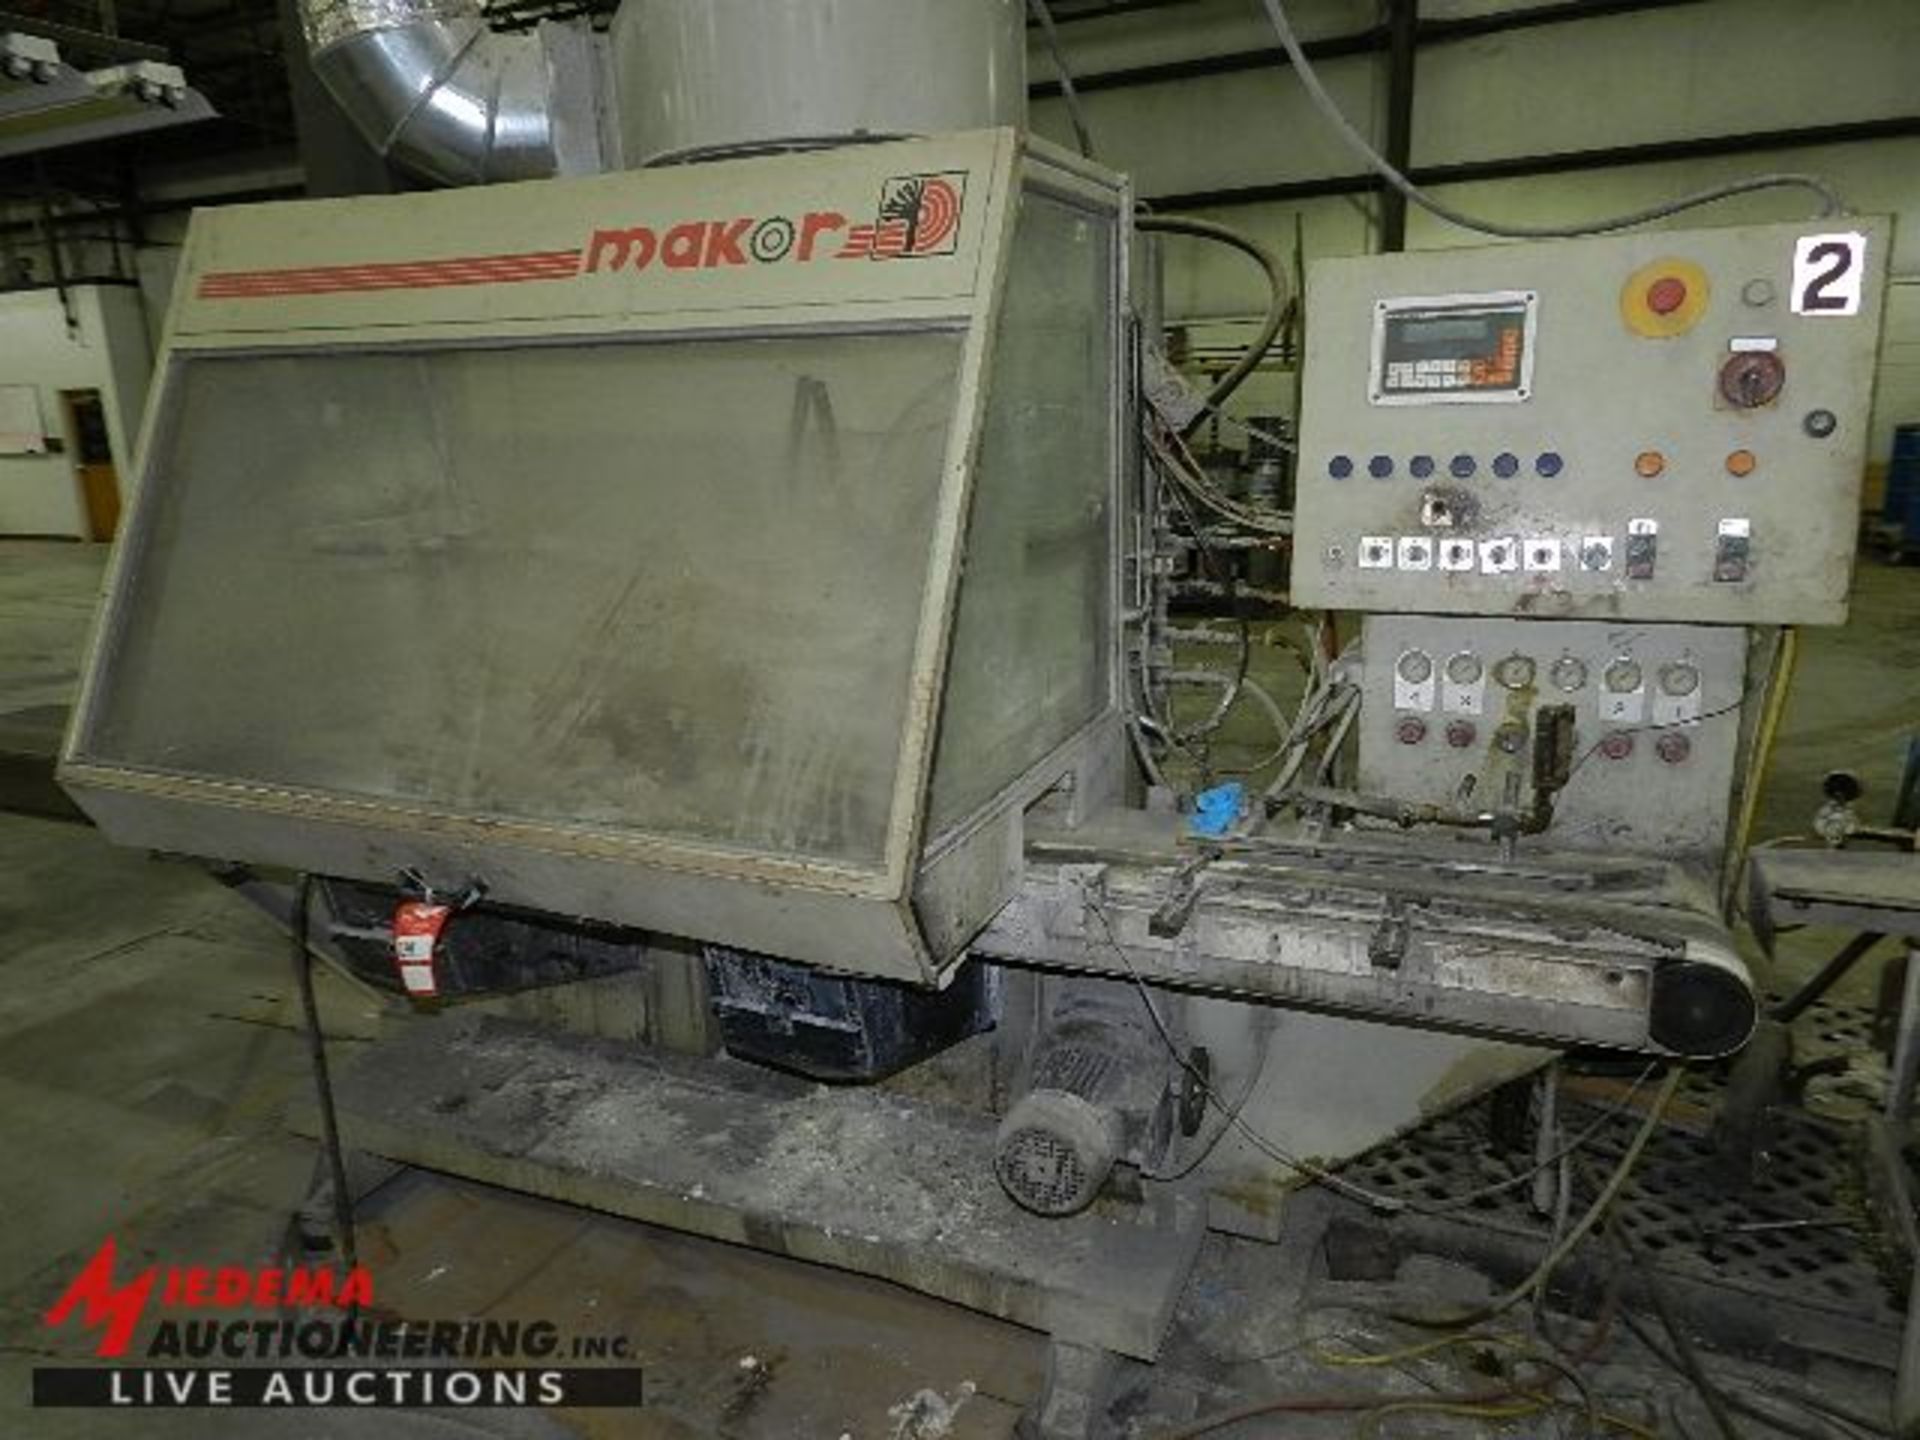 MAKOR CSP490 STAIN BOOTH, SPRAY HEAD BLOWER VENT, 3 STAIN APPLICATOR HEADS, 6" OUT FEED BELT, BLOWER - Image 2 of 6